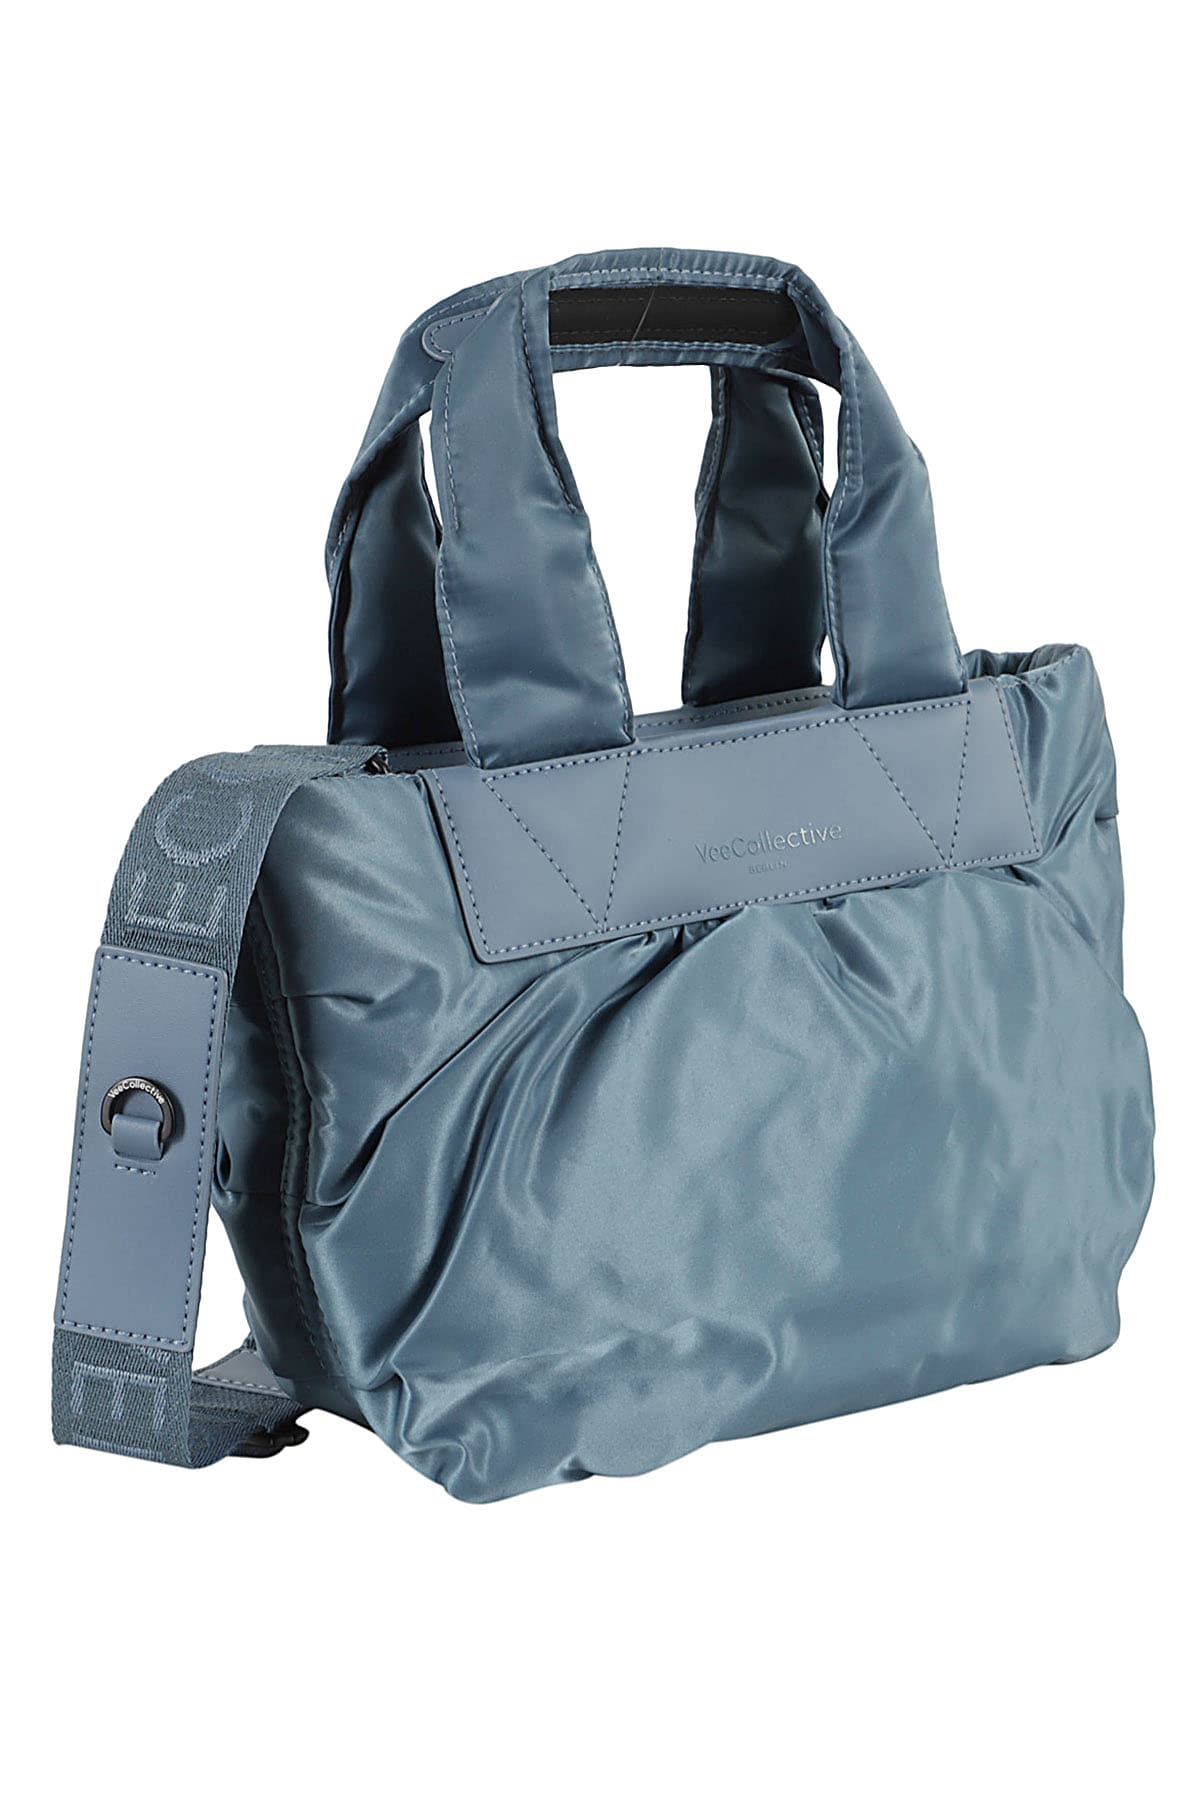 Shop Veecollective Caba Tote Mini In Bluefin Bluef